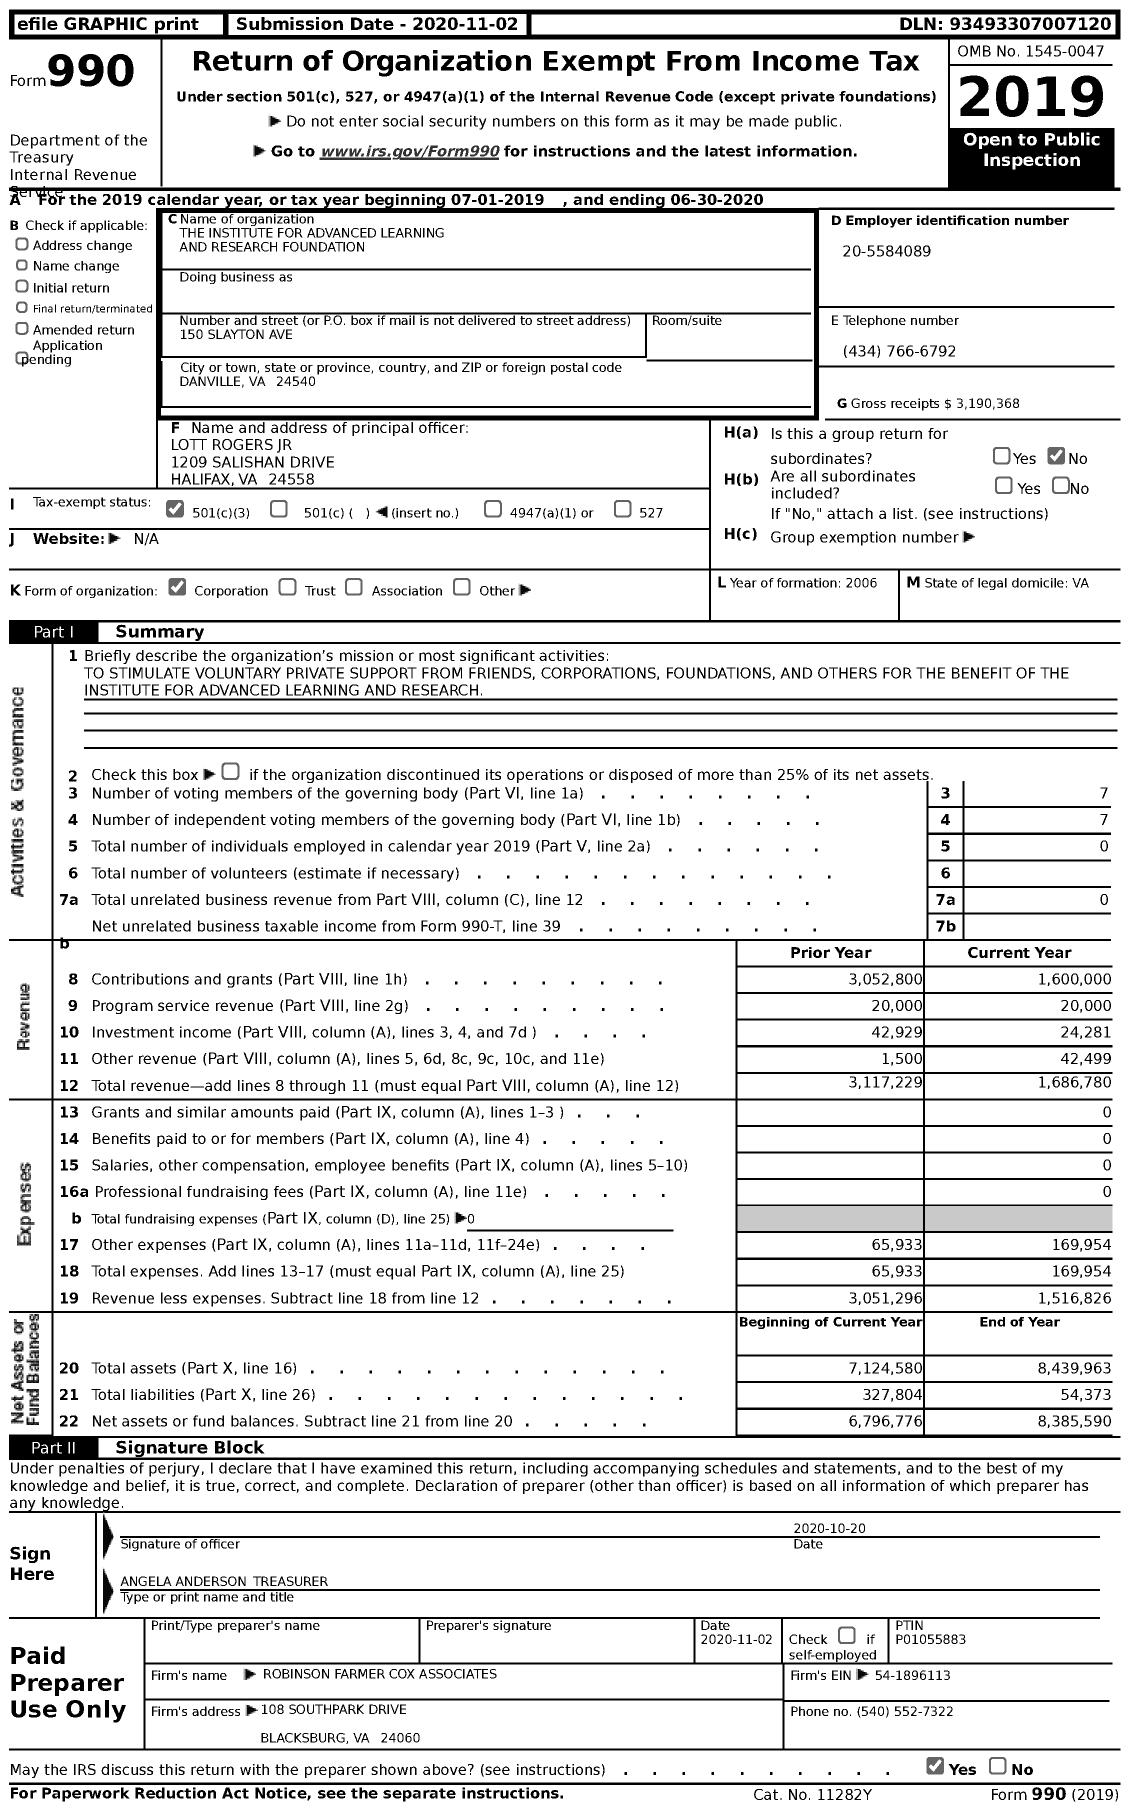 Image of first page of 2019 Form 990 for The Institute for Advanced Learning and Research Foundation